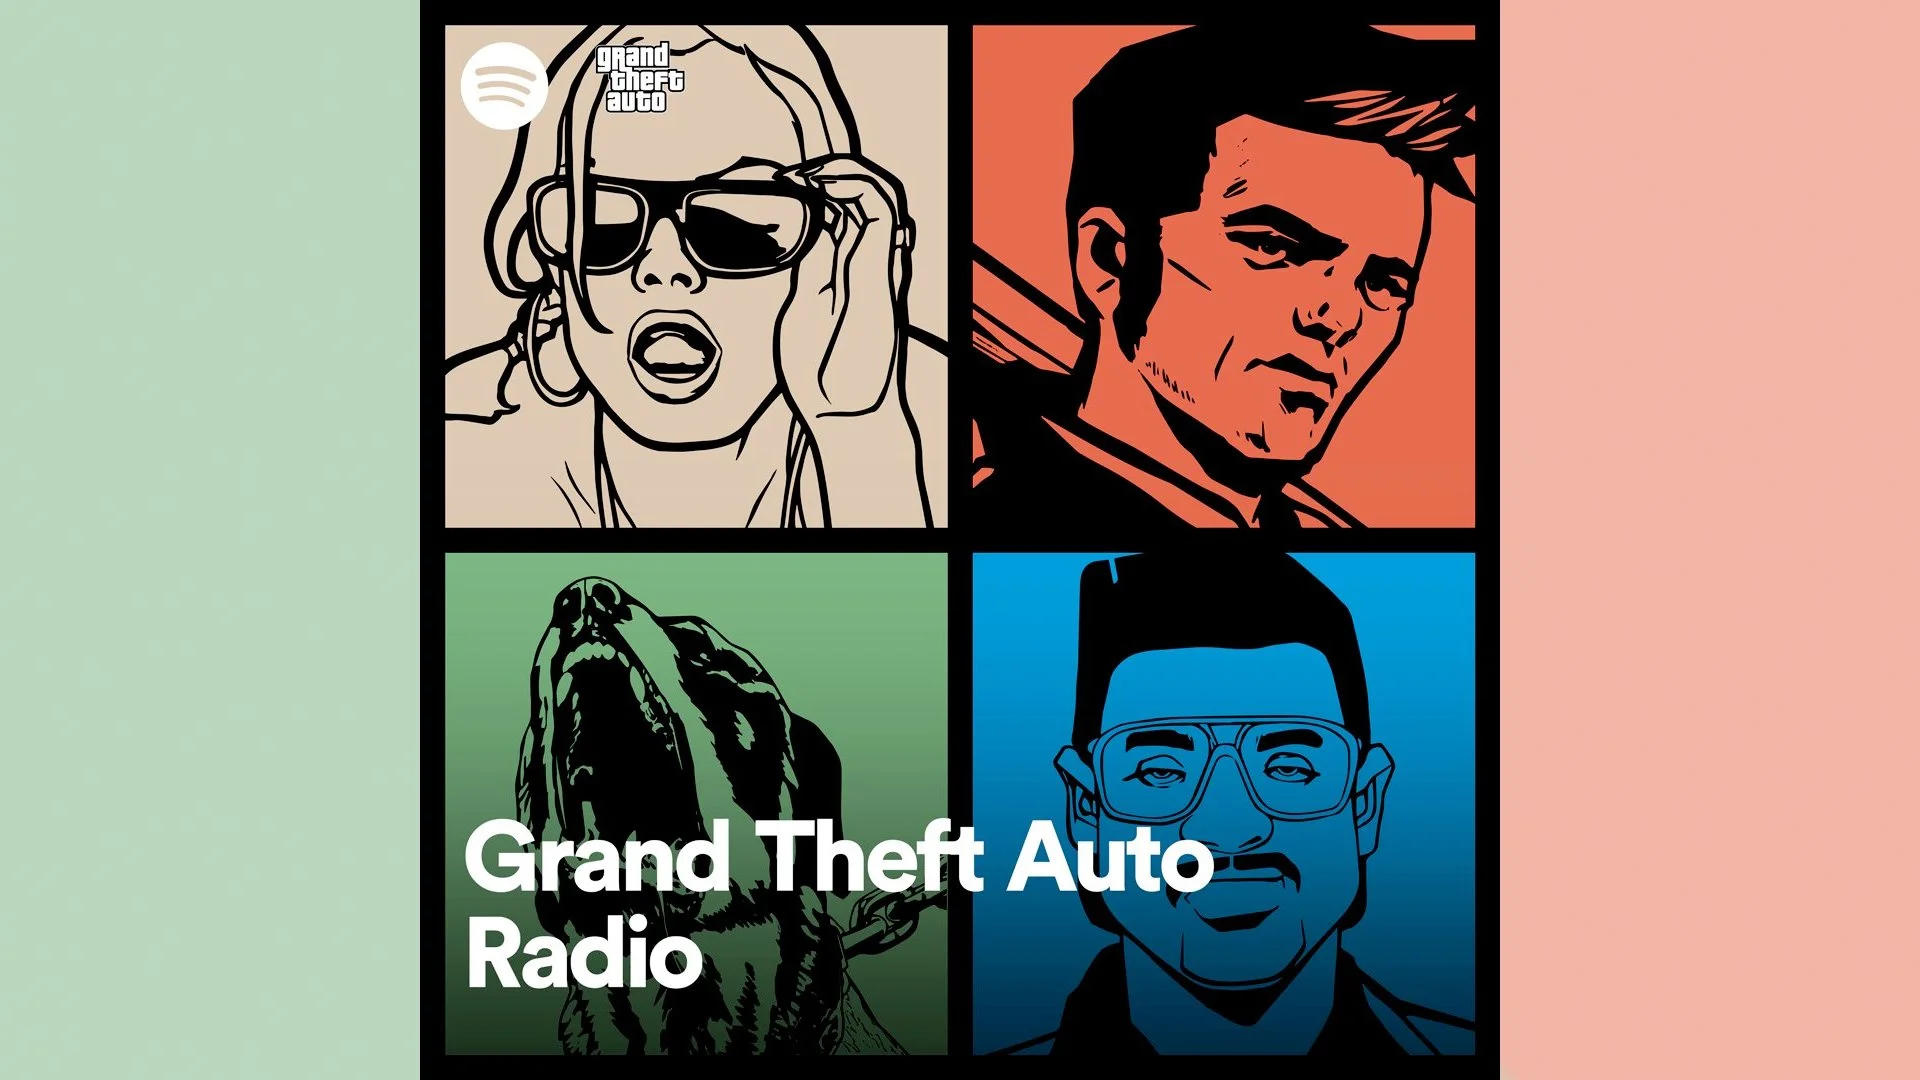 Rockstar Sets the Stage for GTA 6 with a Throwback Spotify Playlist: Grand Theft Auto Radio